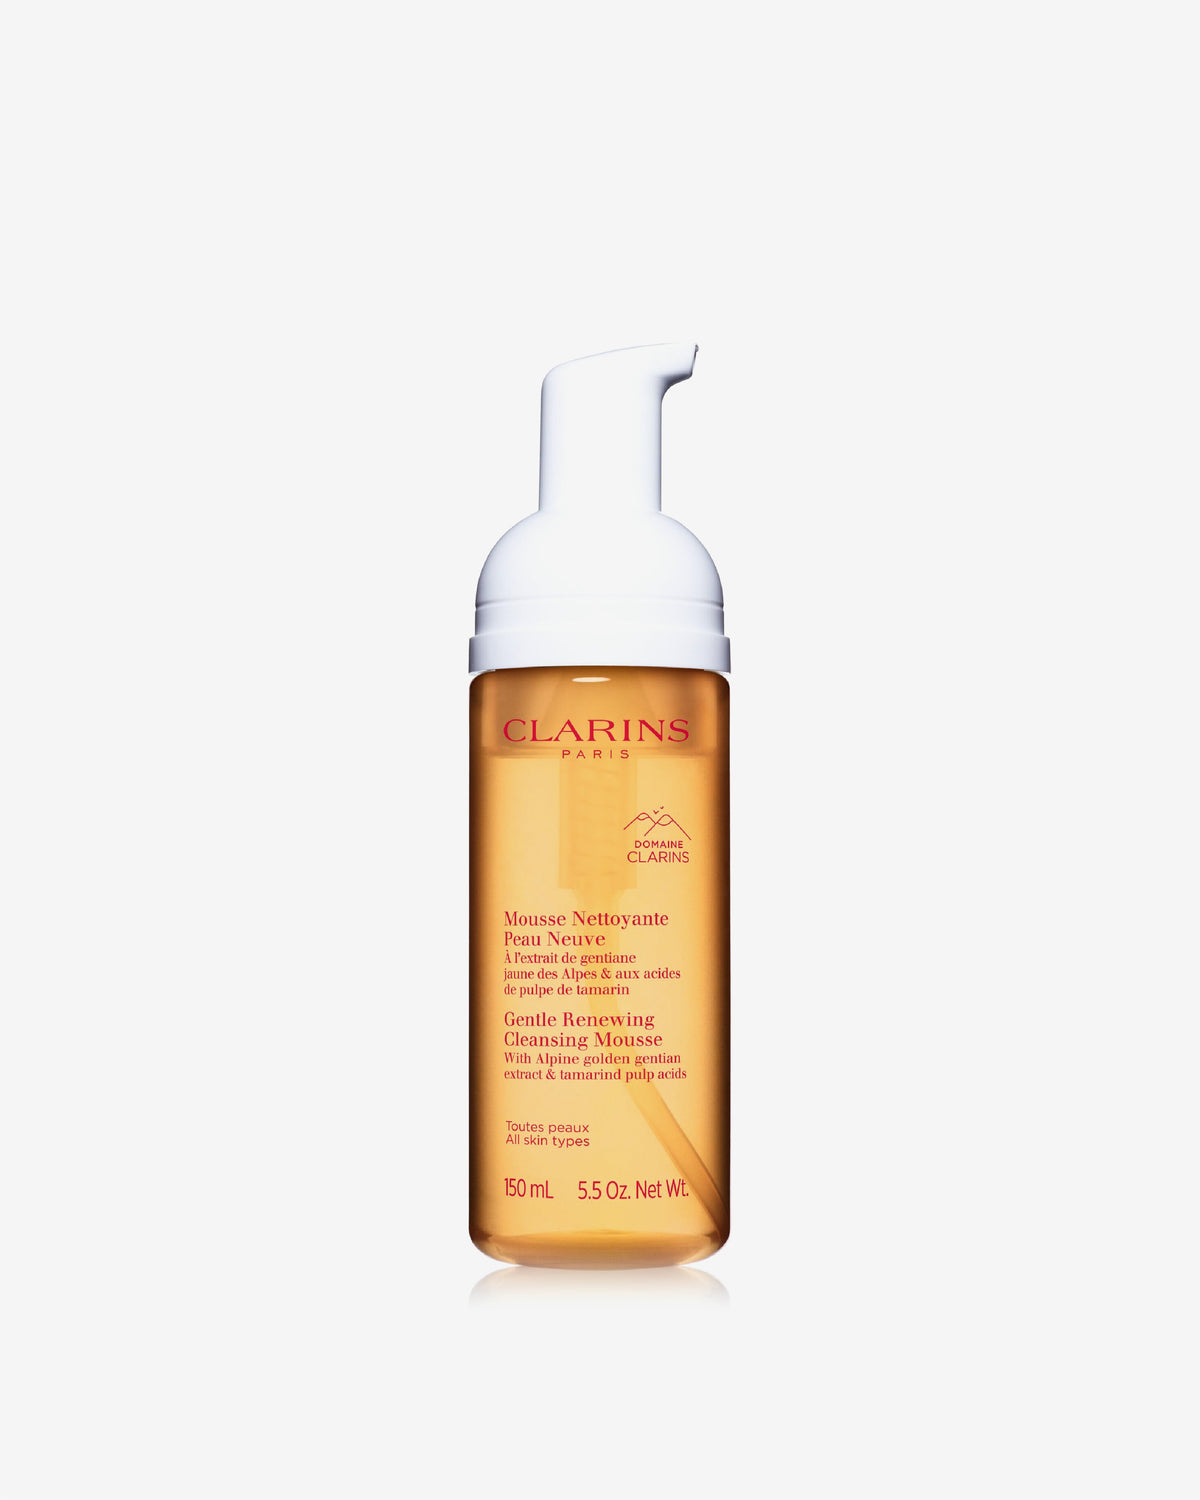 Gentle Renewing Cleansing Mousse Foaming Texture 150Ml